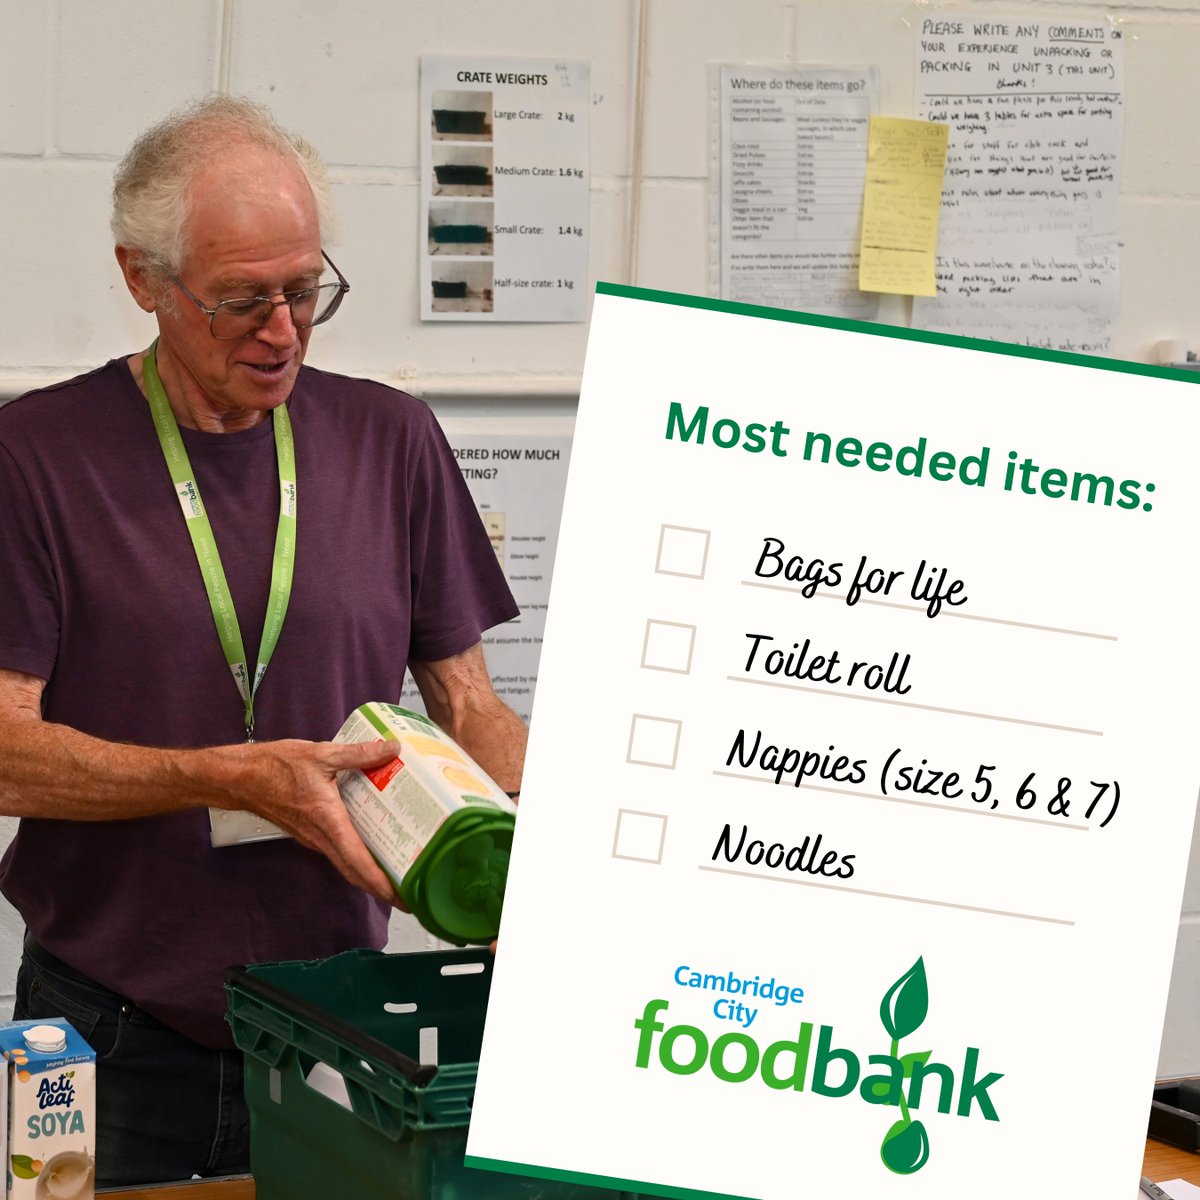 47% of households that experience food insecurity have children under the age of 16. If you want to help families in the local community, please donate. See how you can help: cambridgecity.foodbank.org.uk #FoodInsecurity #Cambridge